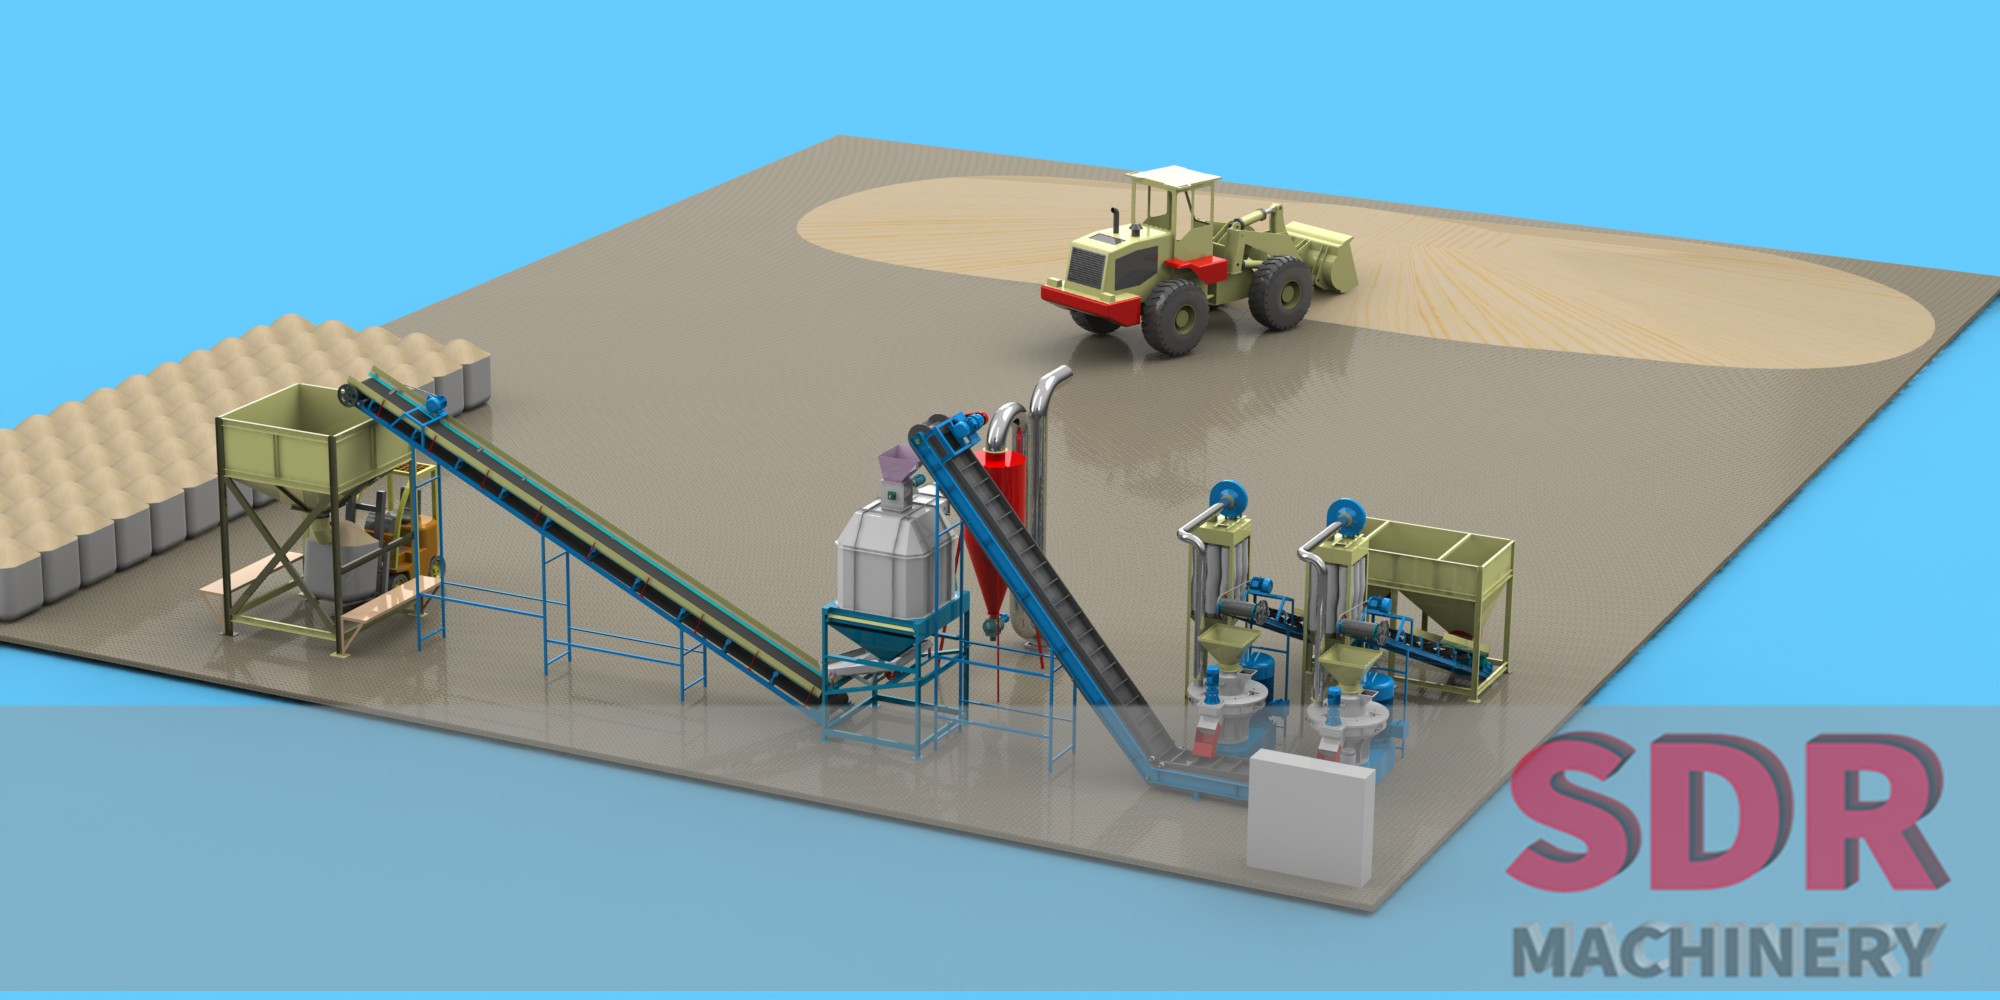 What machines are needed to produce biomass pellet fuel?